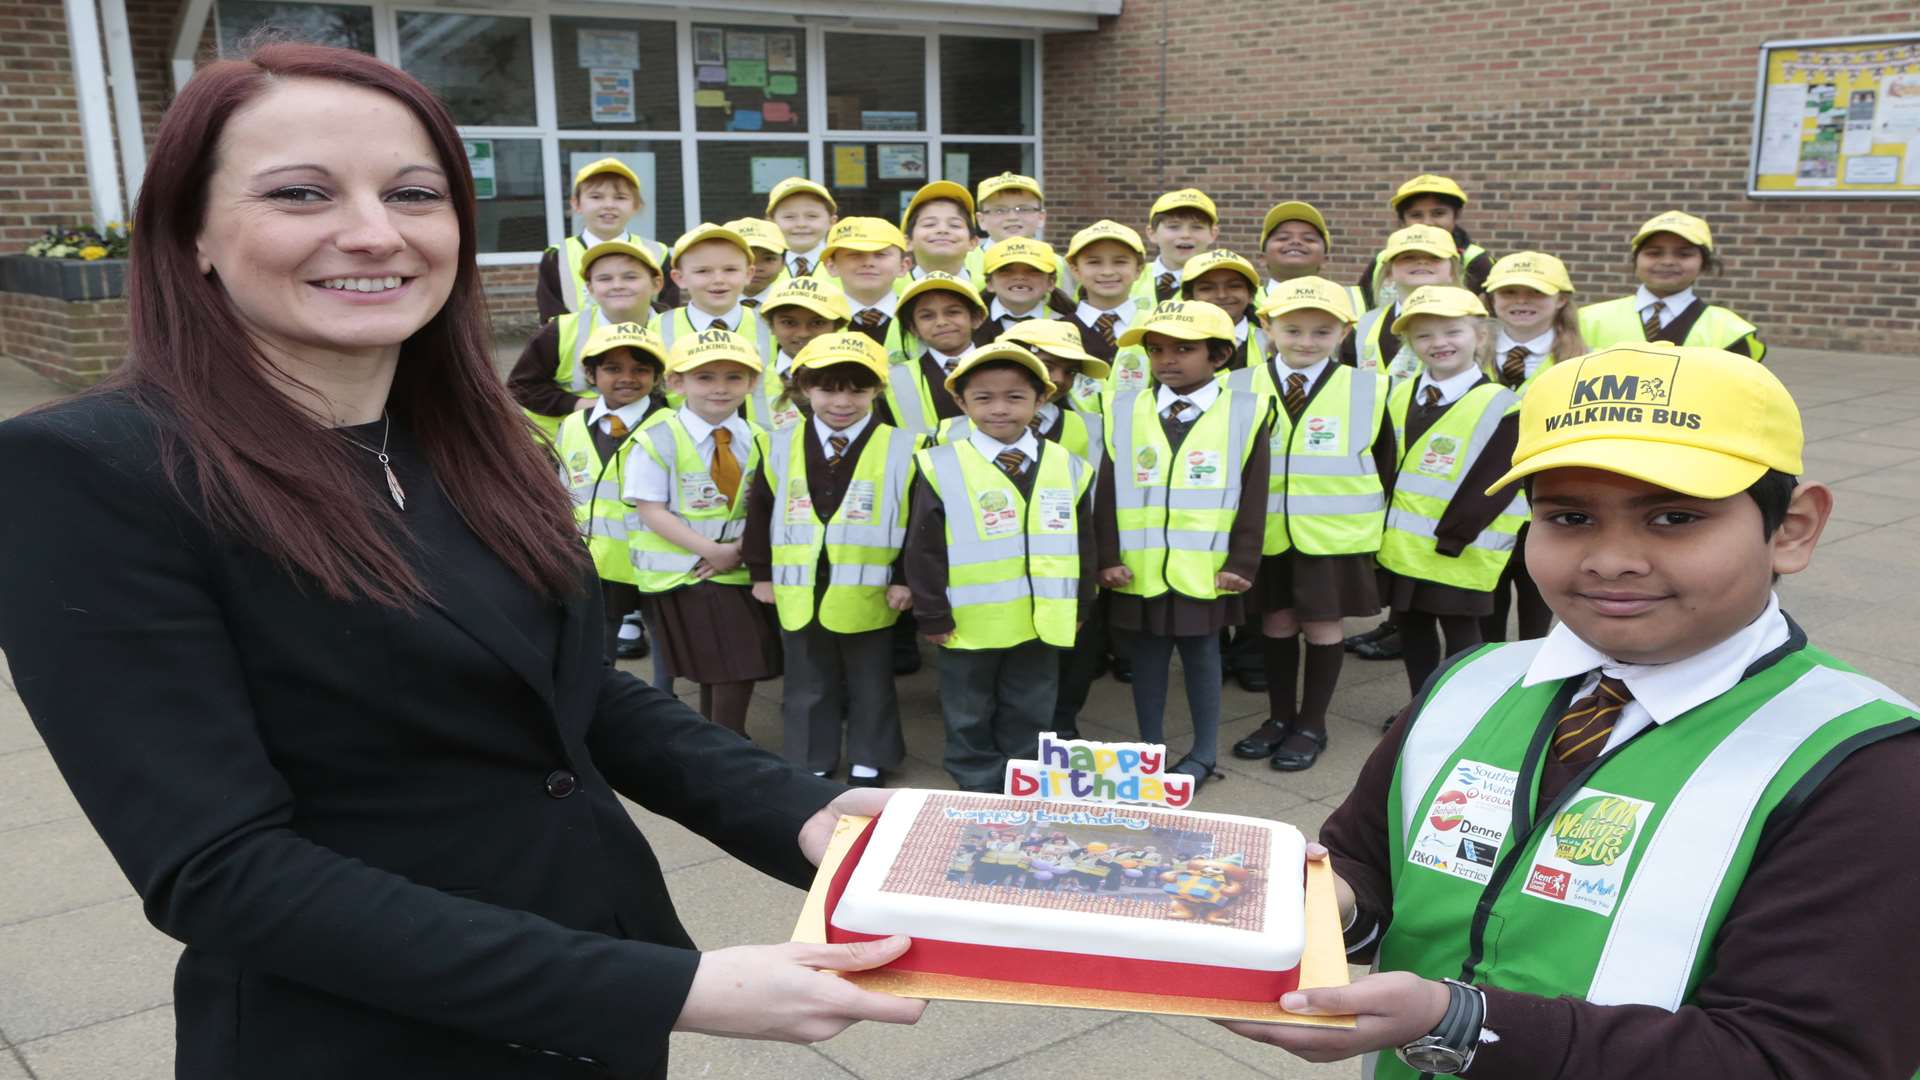 Amy Woods of Three R's Teacher Recruitment with Reuben Kurian and other pupils from St Francis Catholic Primary School celebrating the 4th birthday of their walking bus.